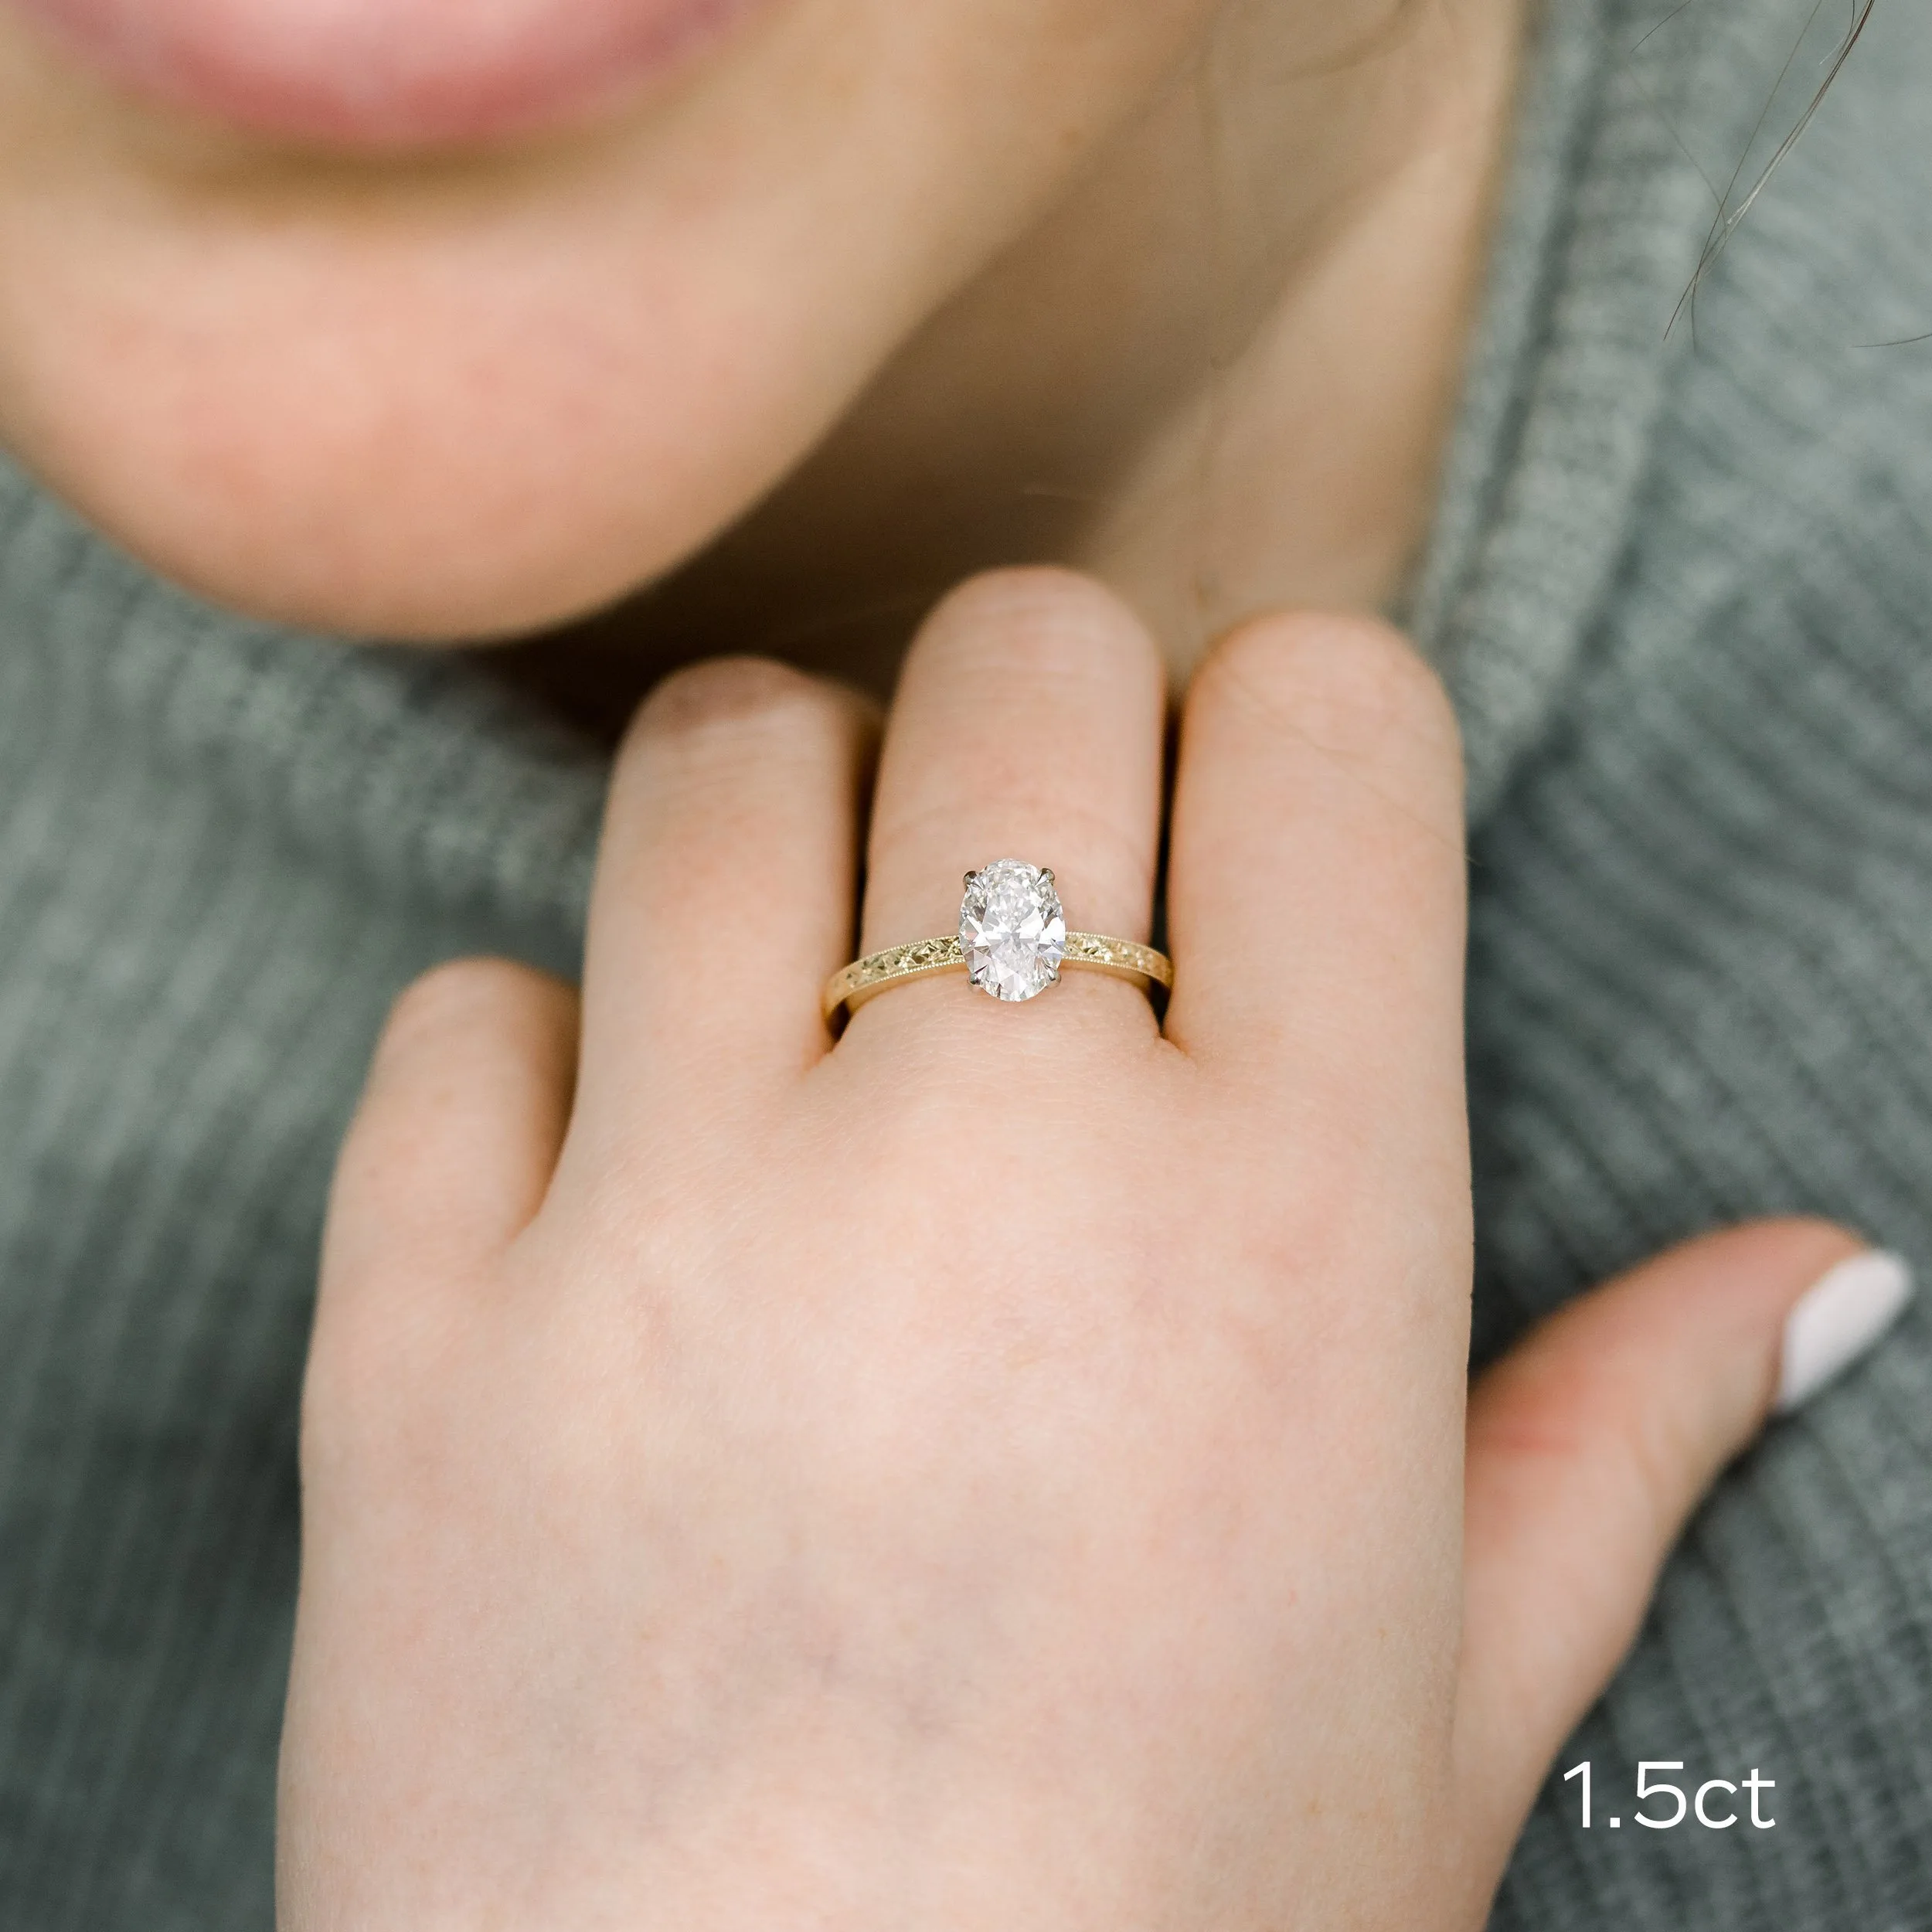 yellow gold and platinum 1.5ct oval solitaire lab diamond engagement ring with floral basket and. engraved band ada diamonds design ad 368 on model